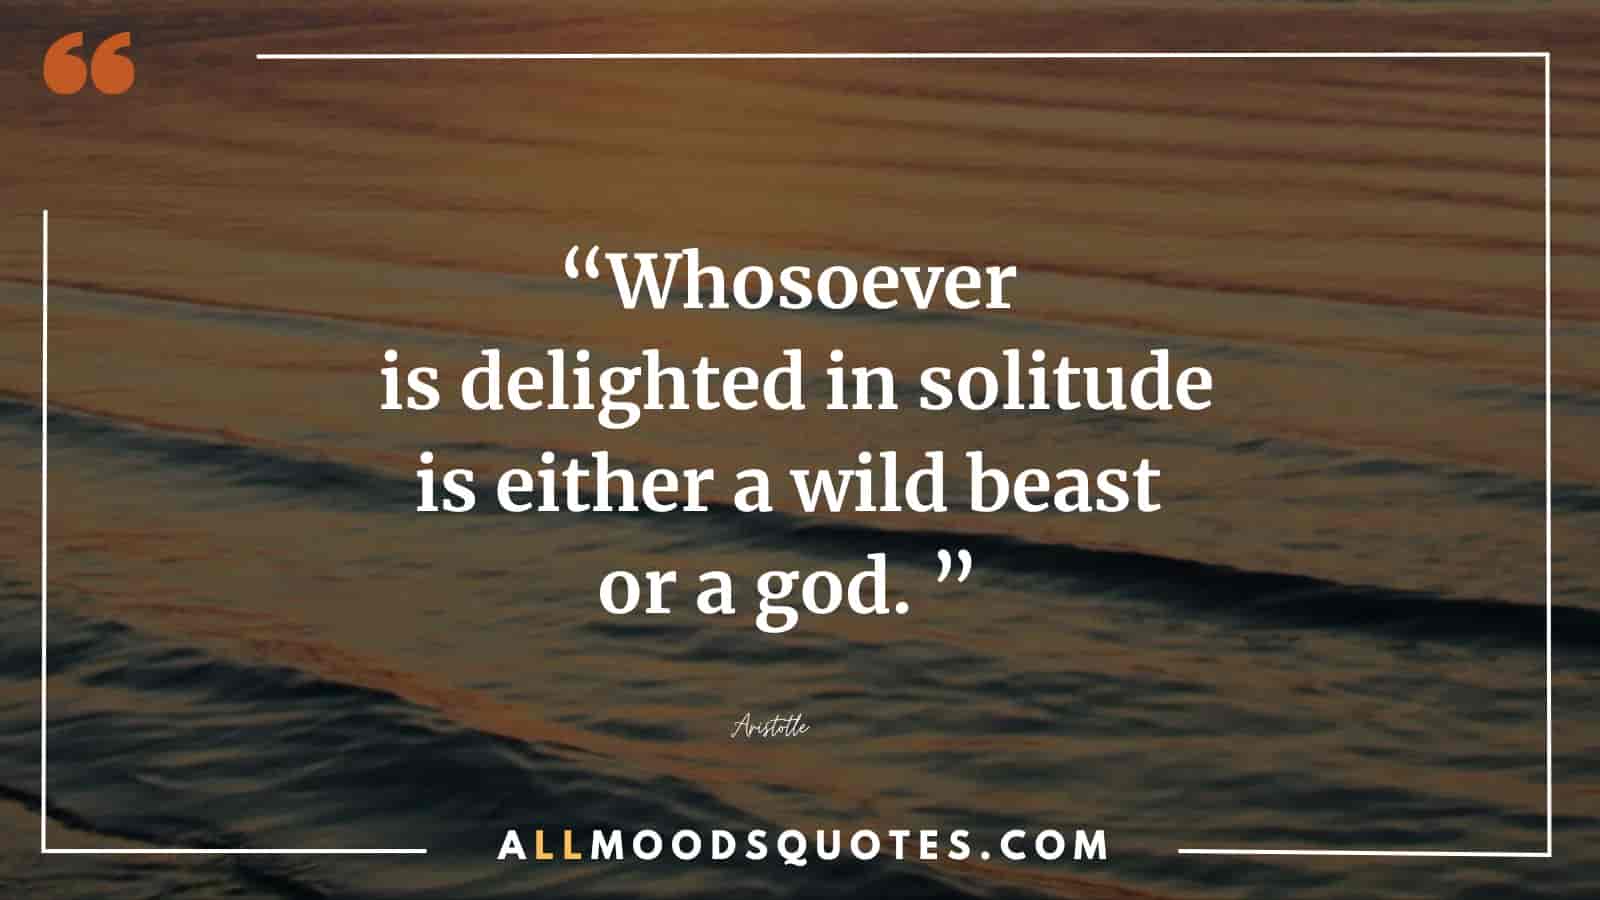 Whosoever is delighted in solitude is either a wild beast or a god. 
Aristotle